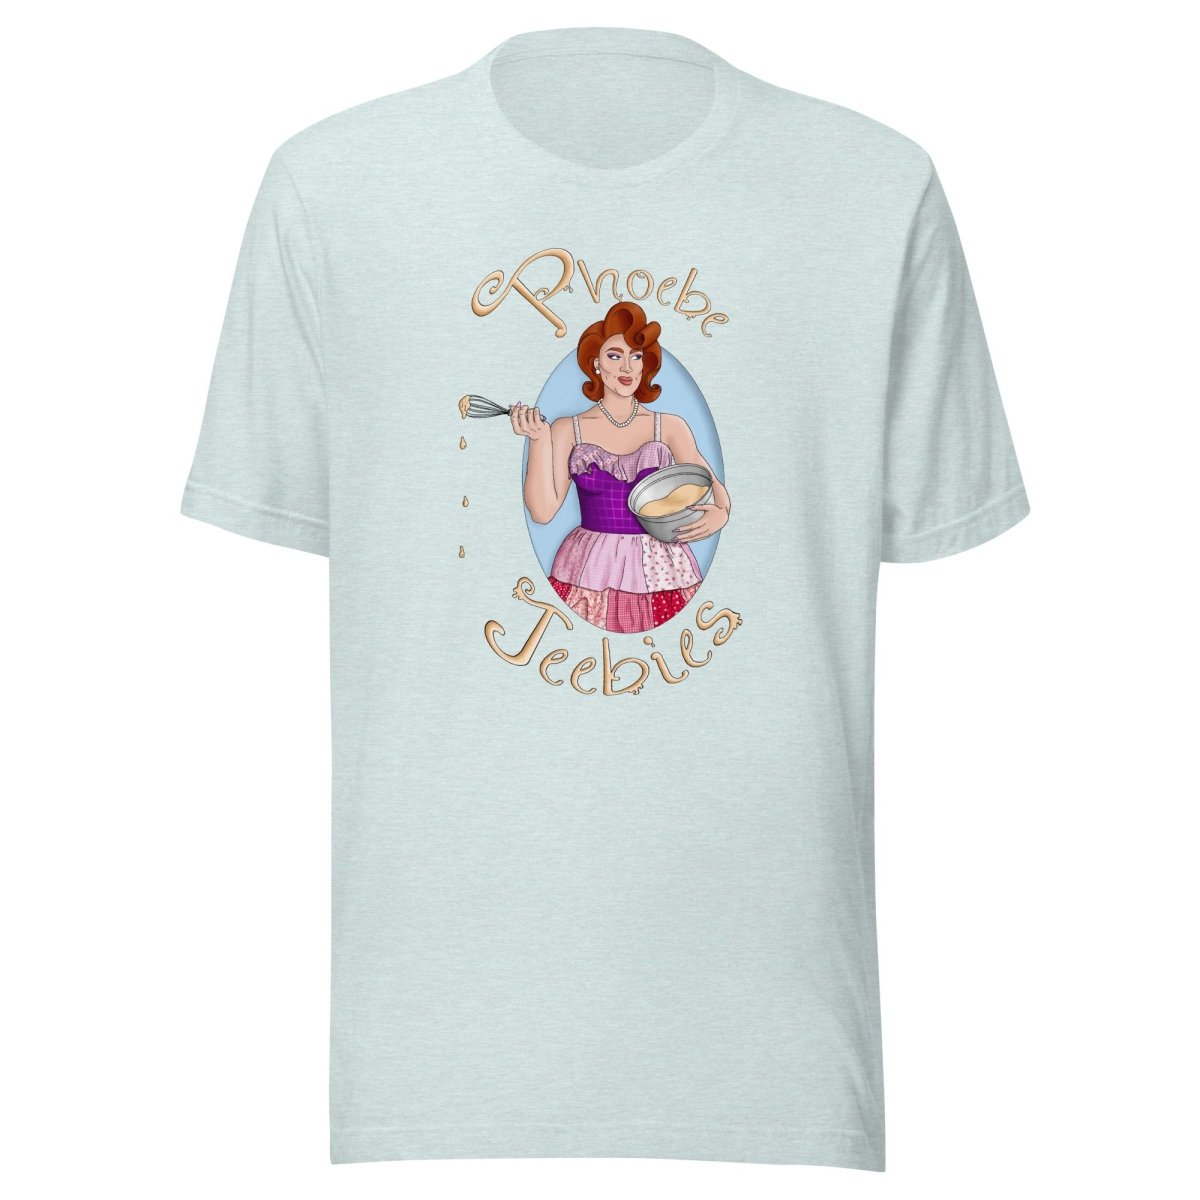 Phoebe Jeebies - Baked T-Shirt - dragqueenmerch